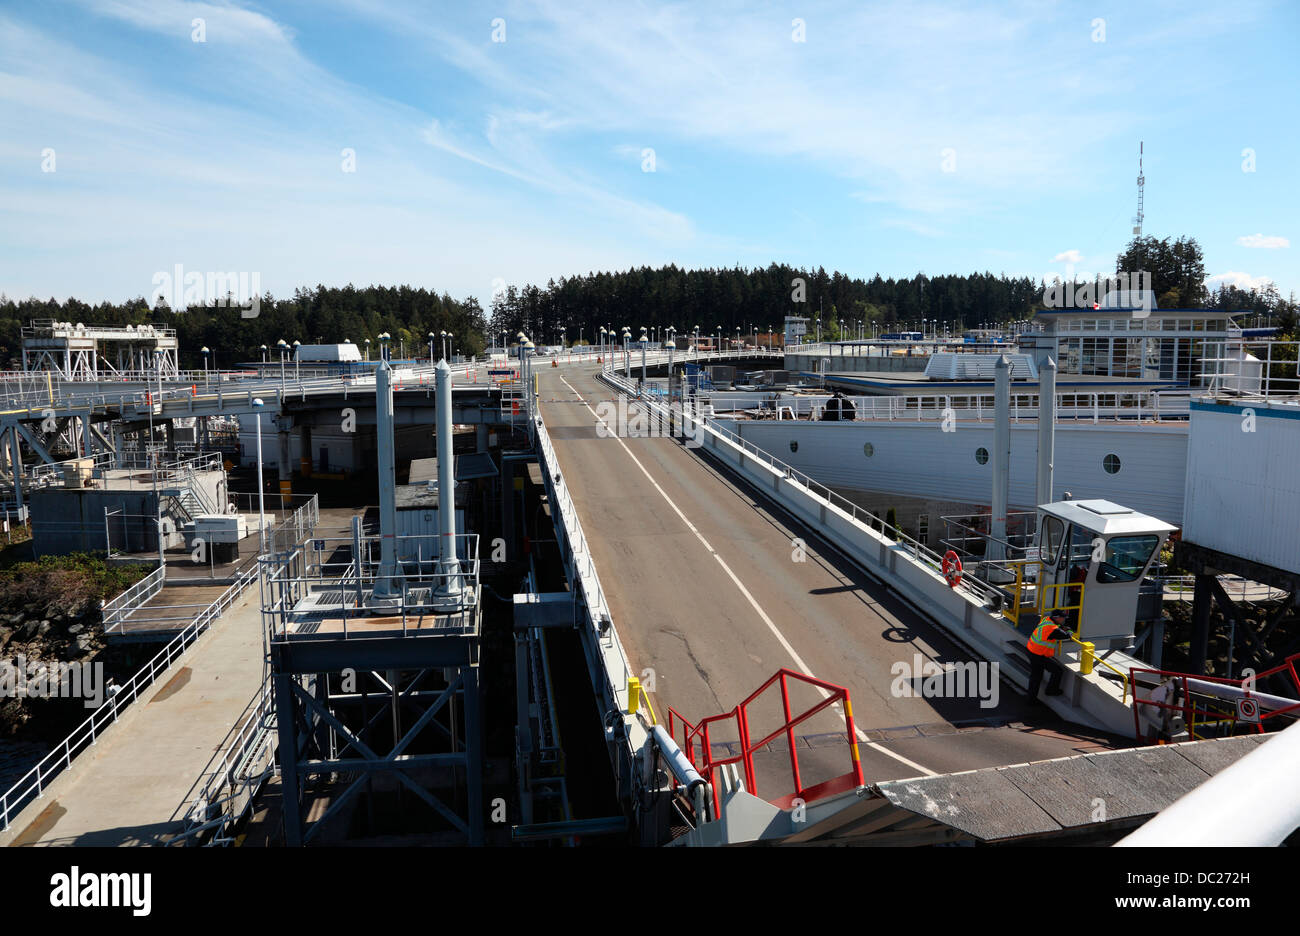 Swartz bay ferry terminal Vancouver island British Columbia Canada. Ramp leading cars onto ferry boats Stock Photo